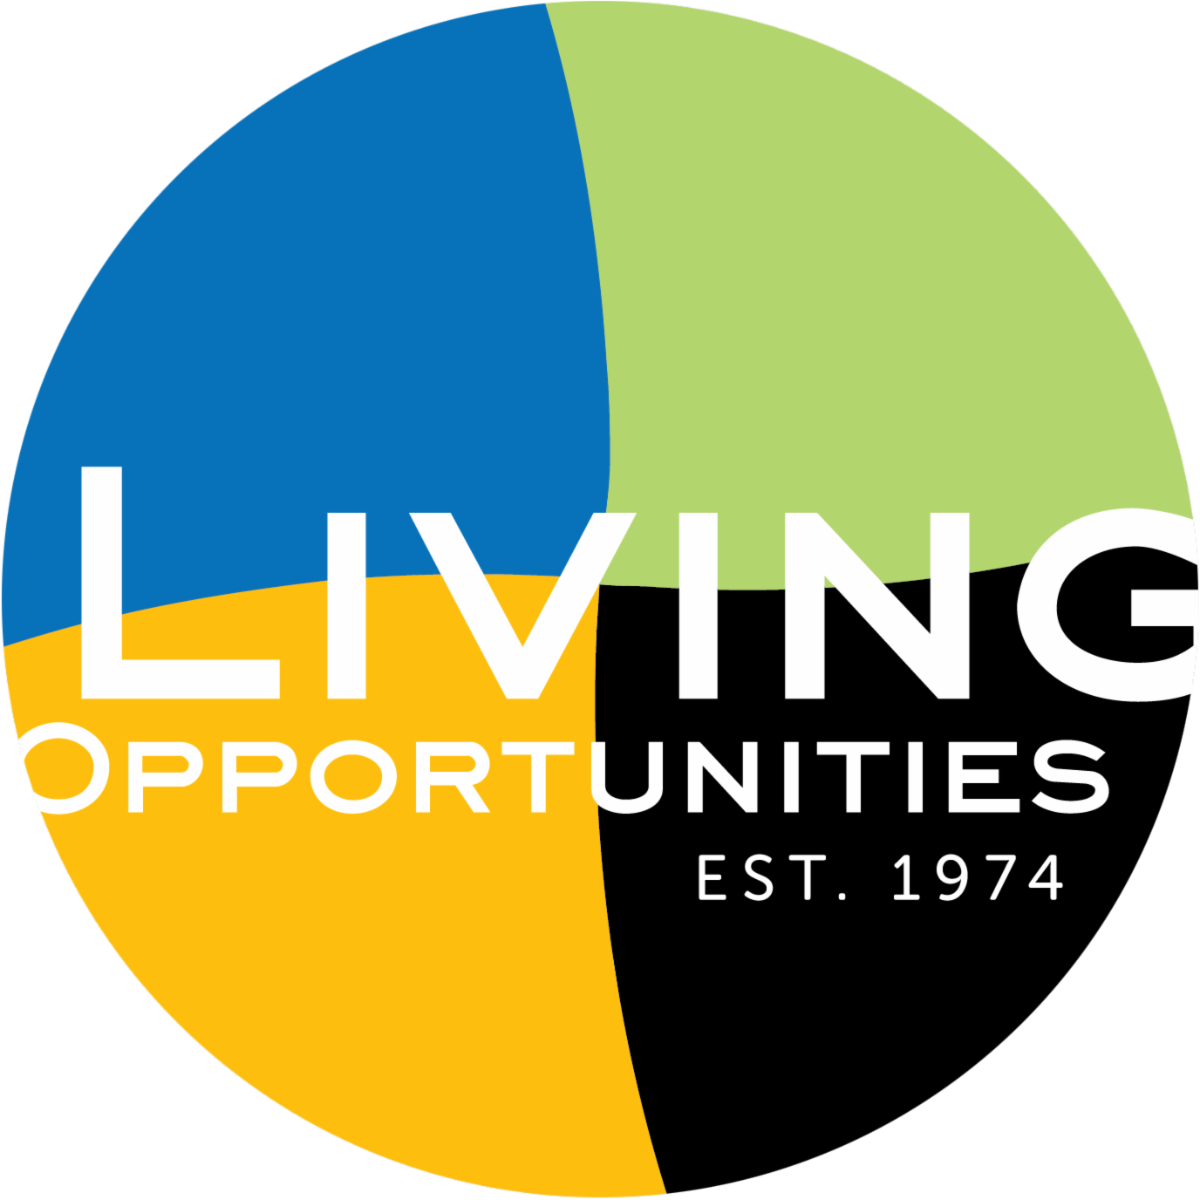 Living Opportunities round logo with four colors